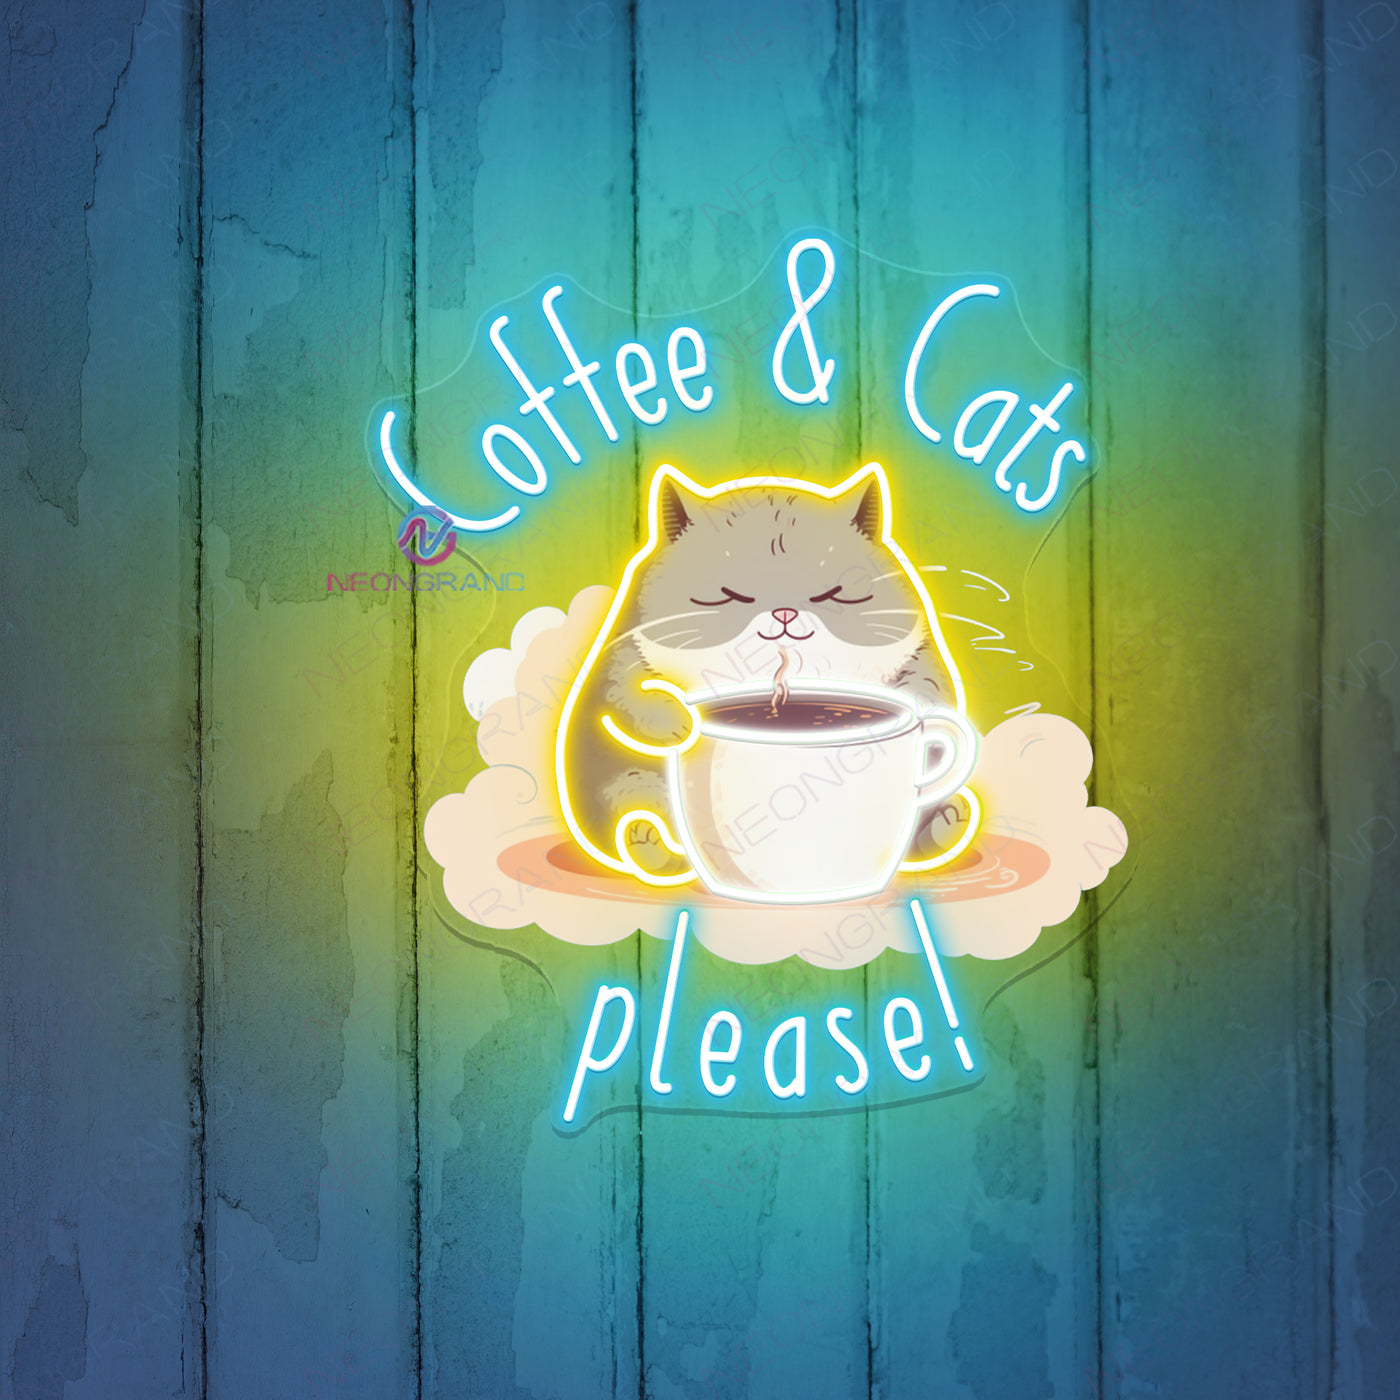 Coffee And Cats Please Neon Sign Cafe Led Light